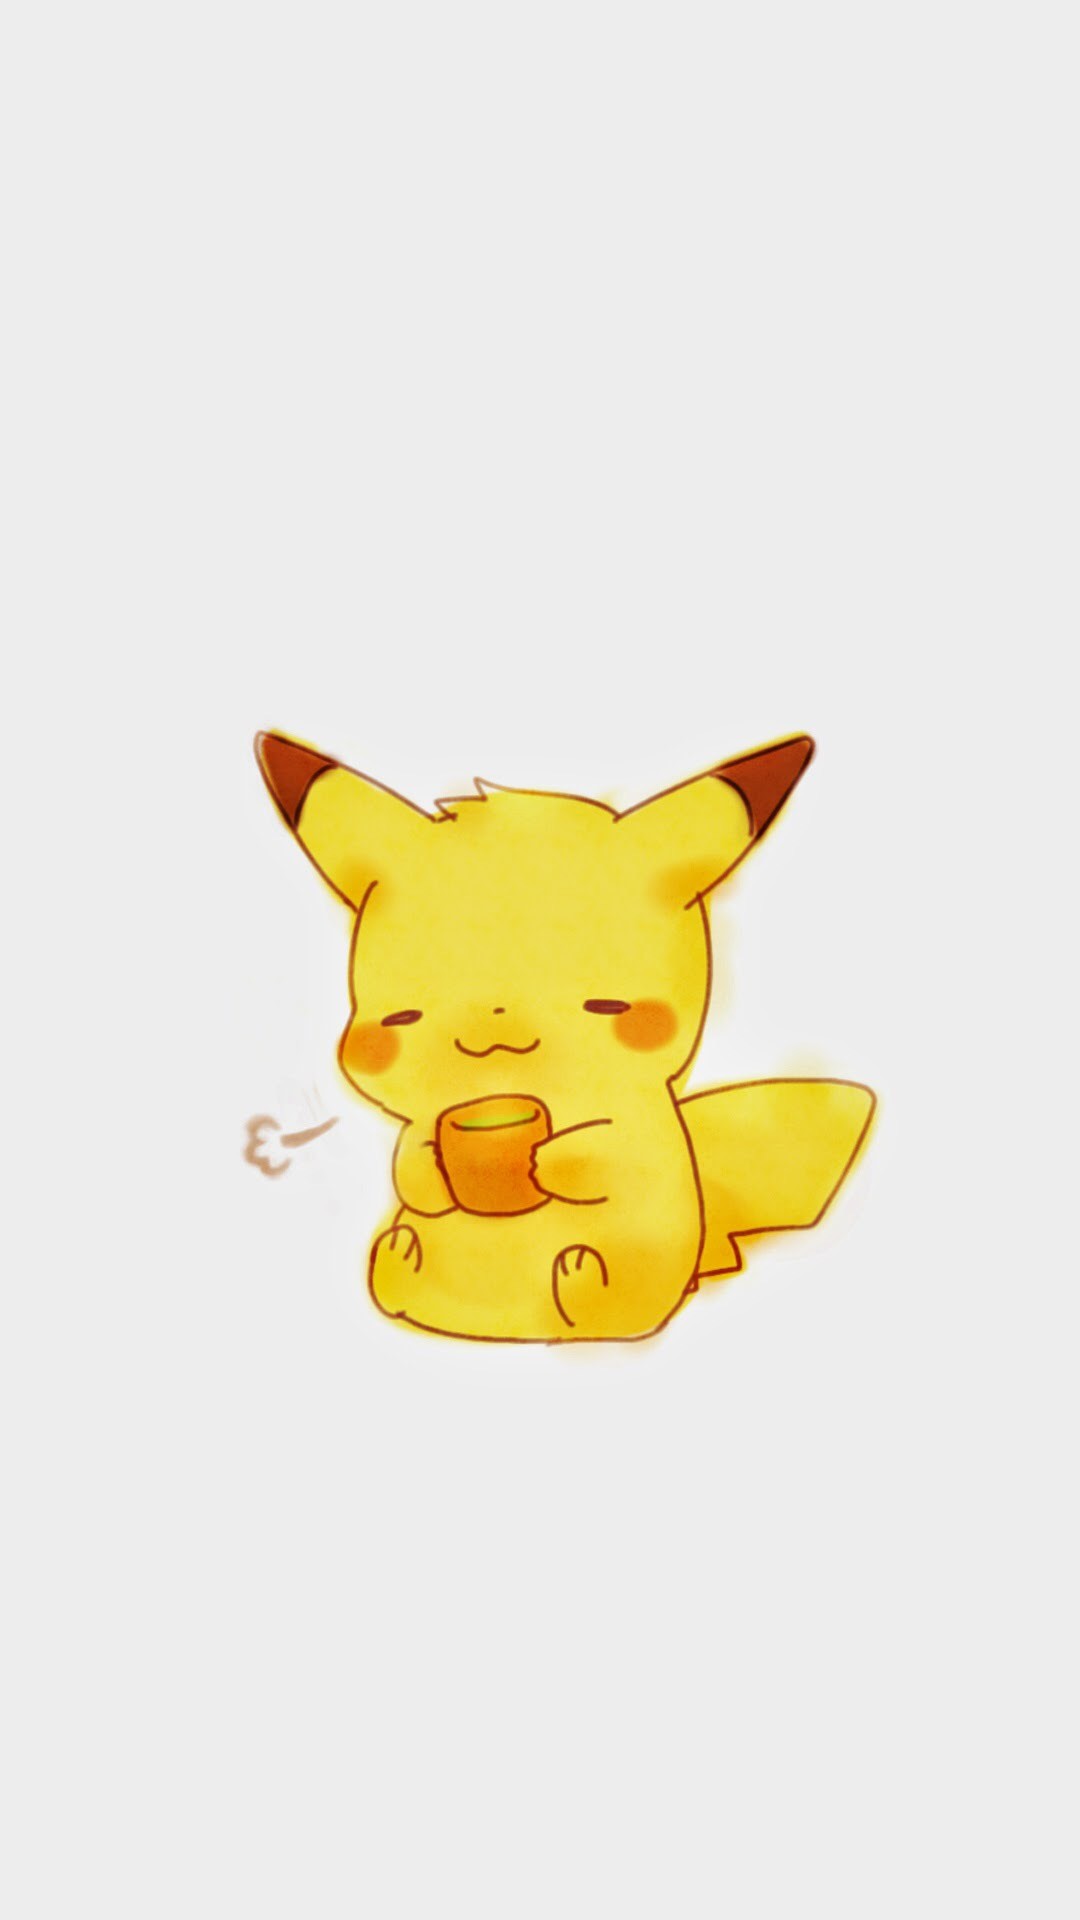 Pikachu Wallpapers For Iphone  Wallpaper Cave